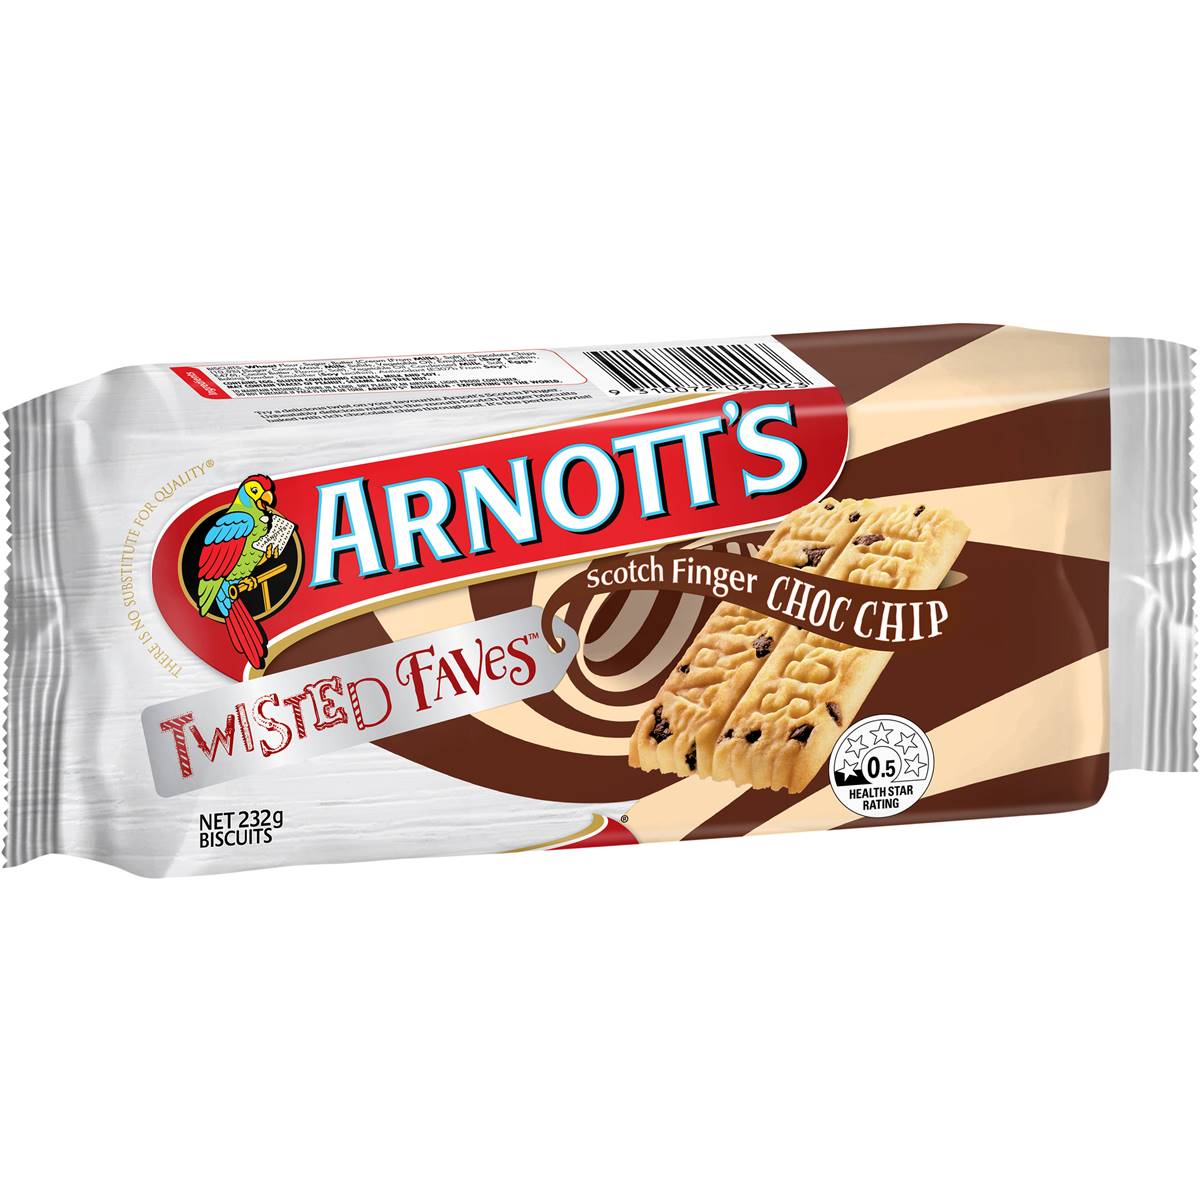 Calories In Arnotts Scotch Finger Choc Chip Calcount 0220